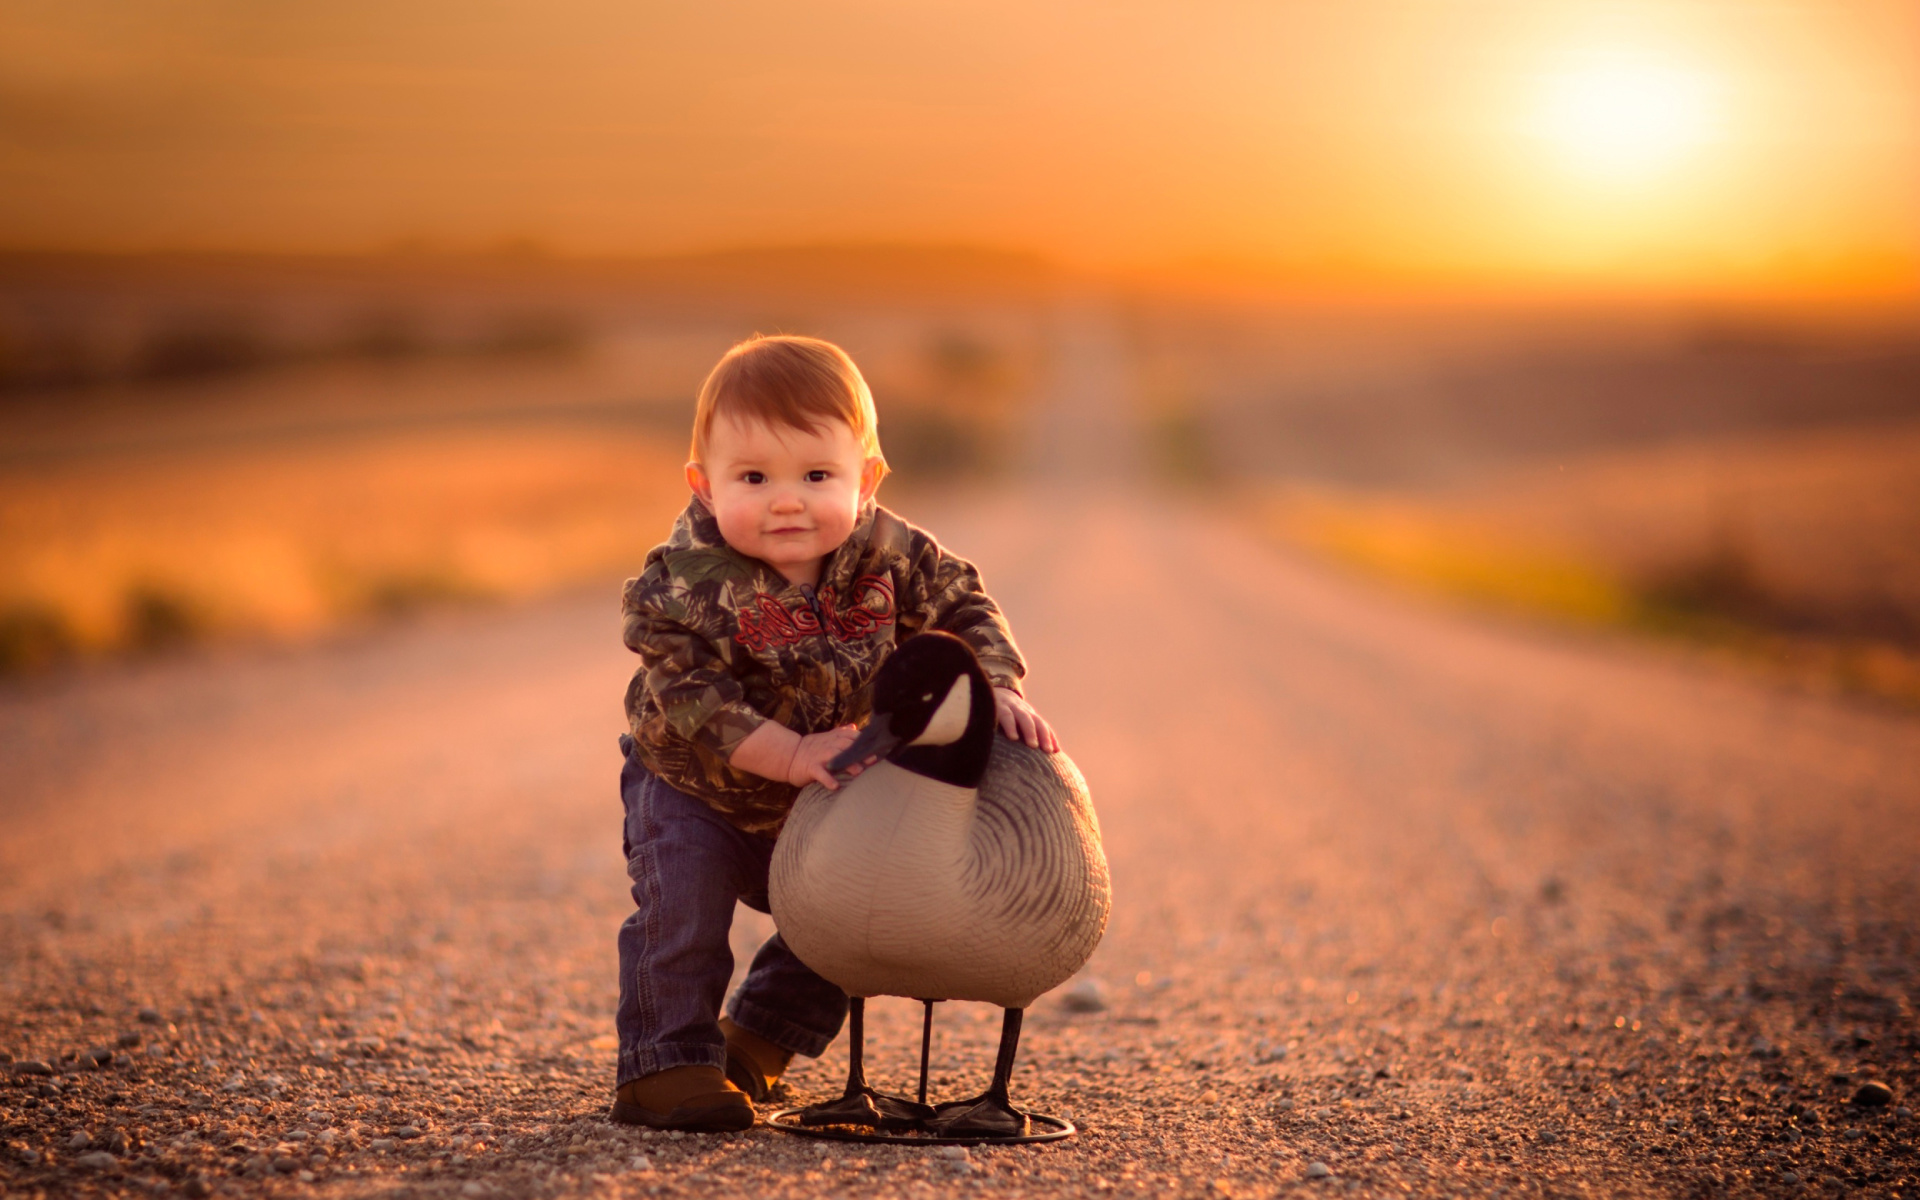 Kid and Duck wallpaper 1920x1200